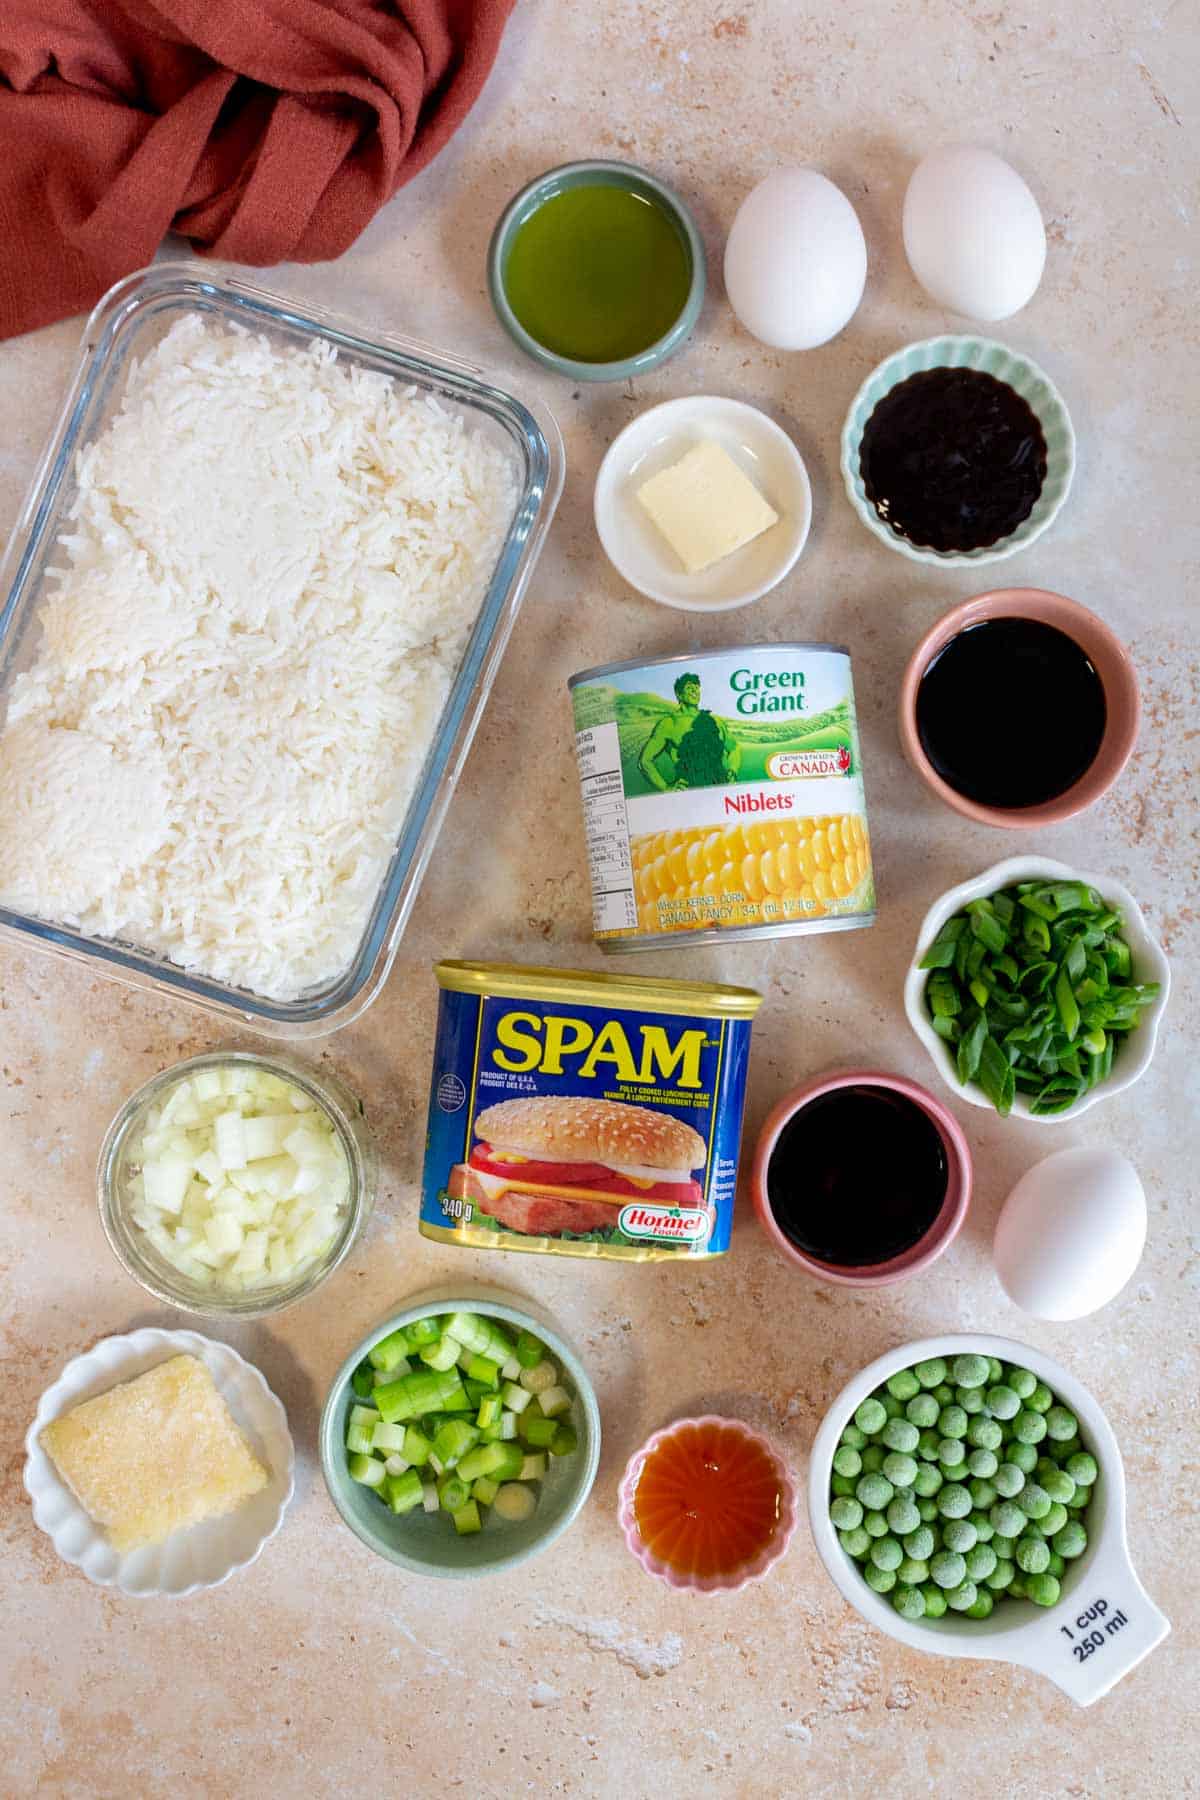 Ingredients needed to make spam fried rice.